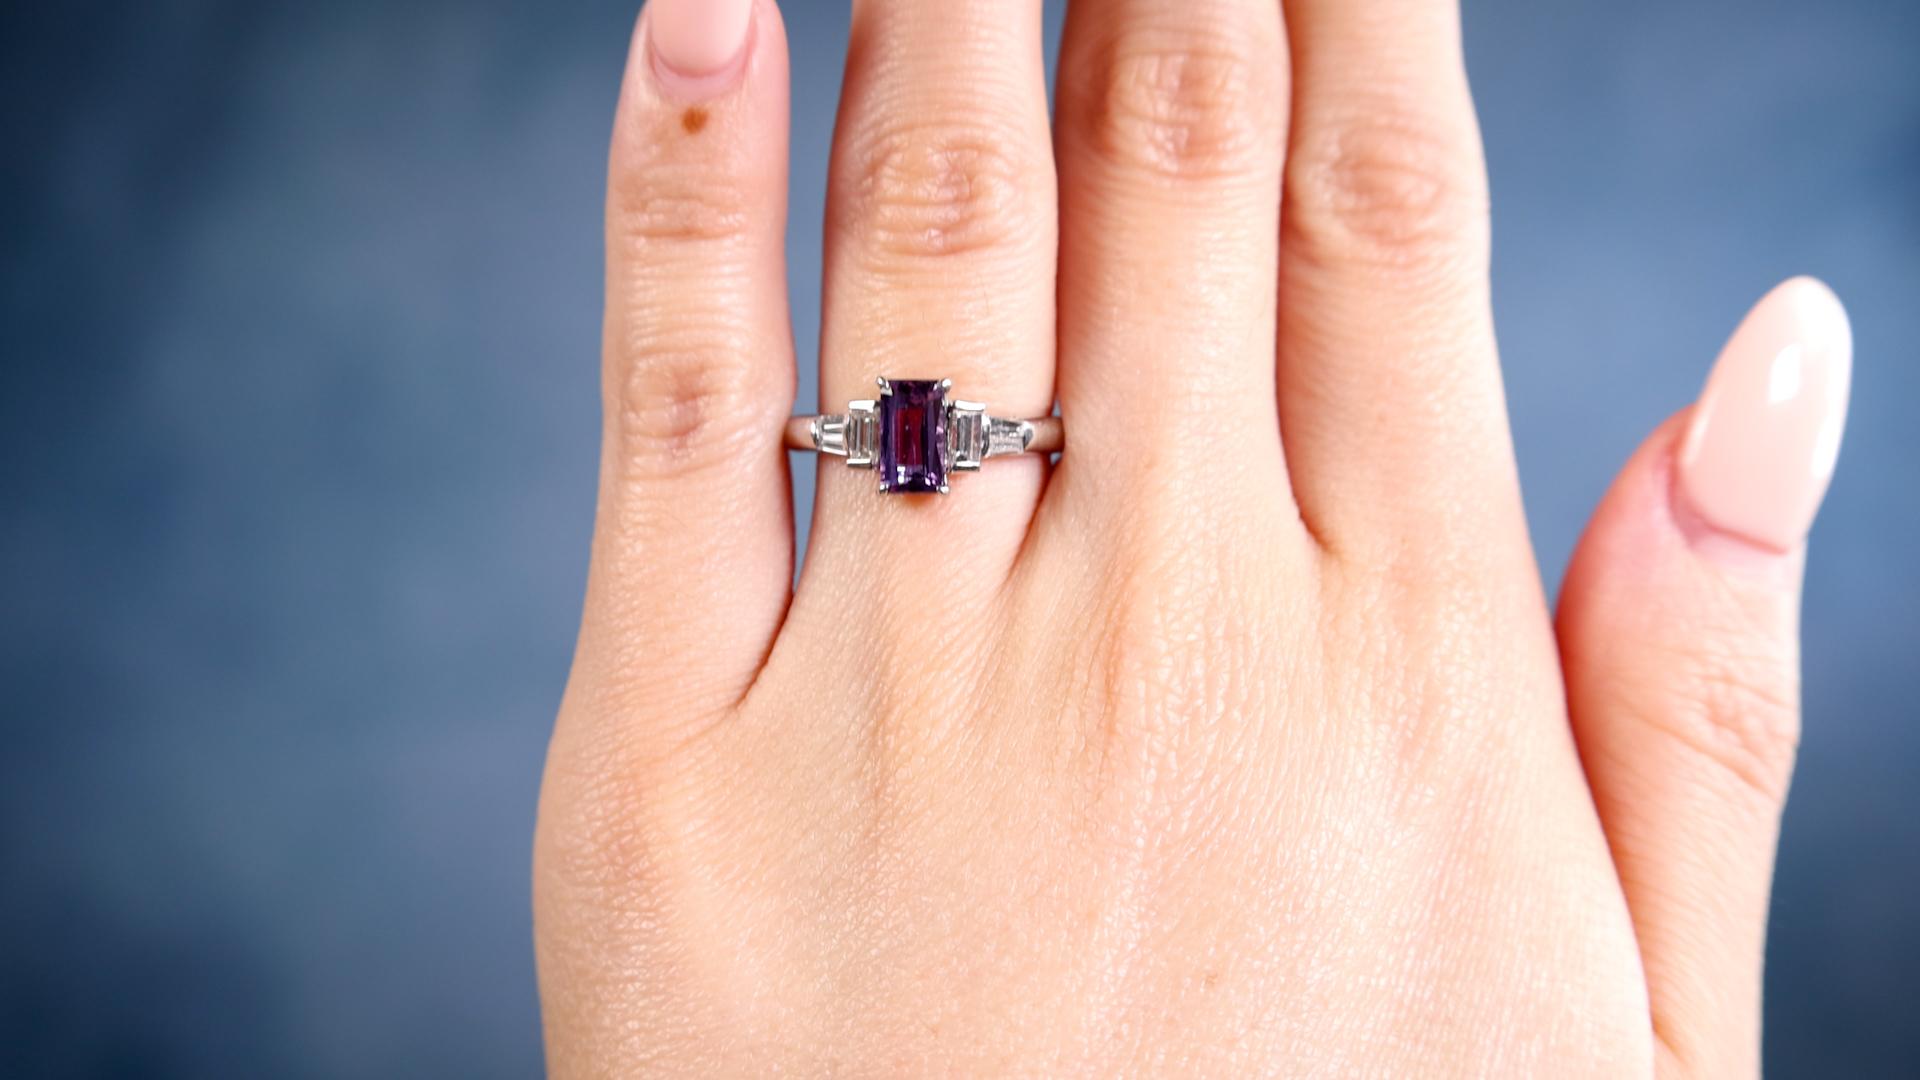 One Purple Sapphire Diamond Platinum Ring. Featuring one baguette cut purple sapphire of 0.99 carat. Accented by two baguette and four tapered baguette cut diamonds with a total weight of 0.40 carat, graded F-G color, VS clarity. Crafted in platinum